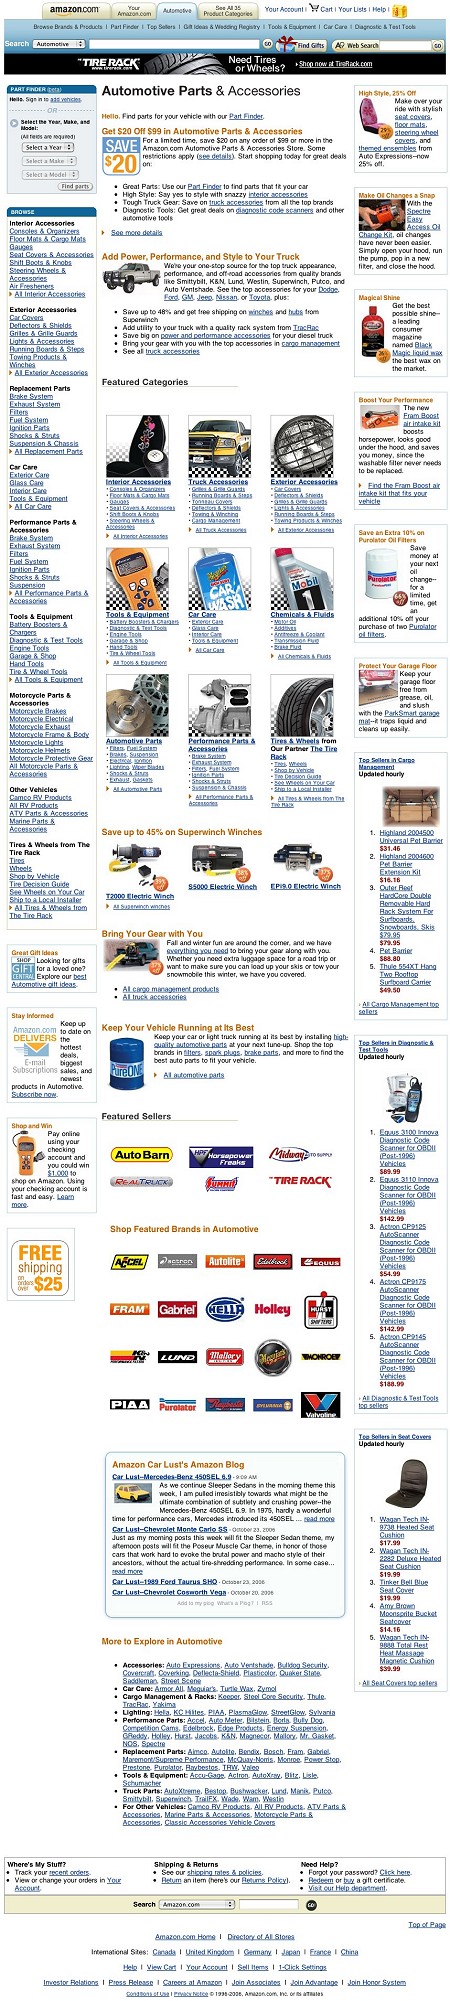 Automotive Parts and Accessories Store